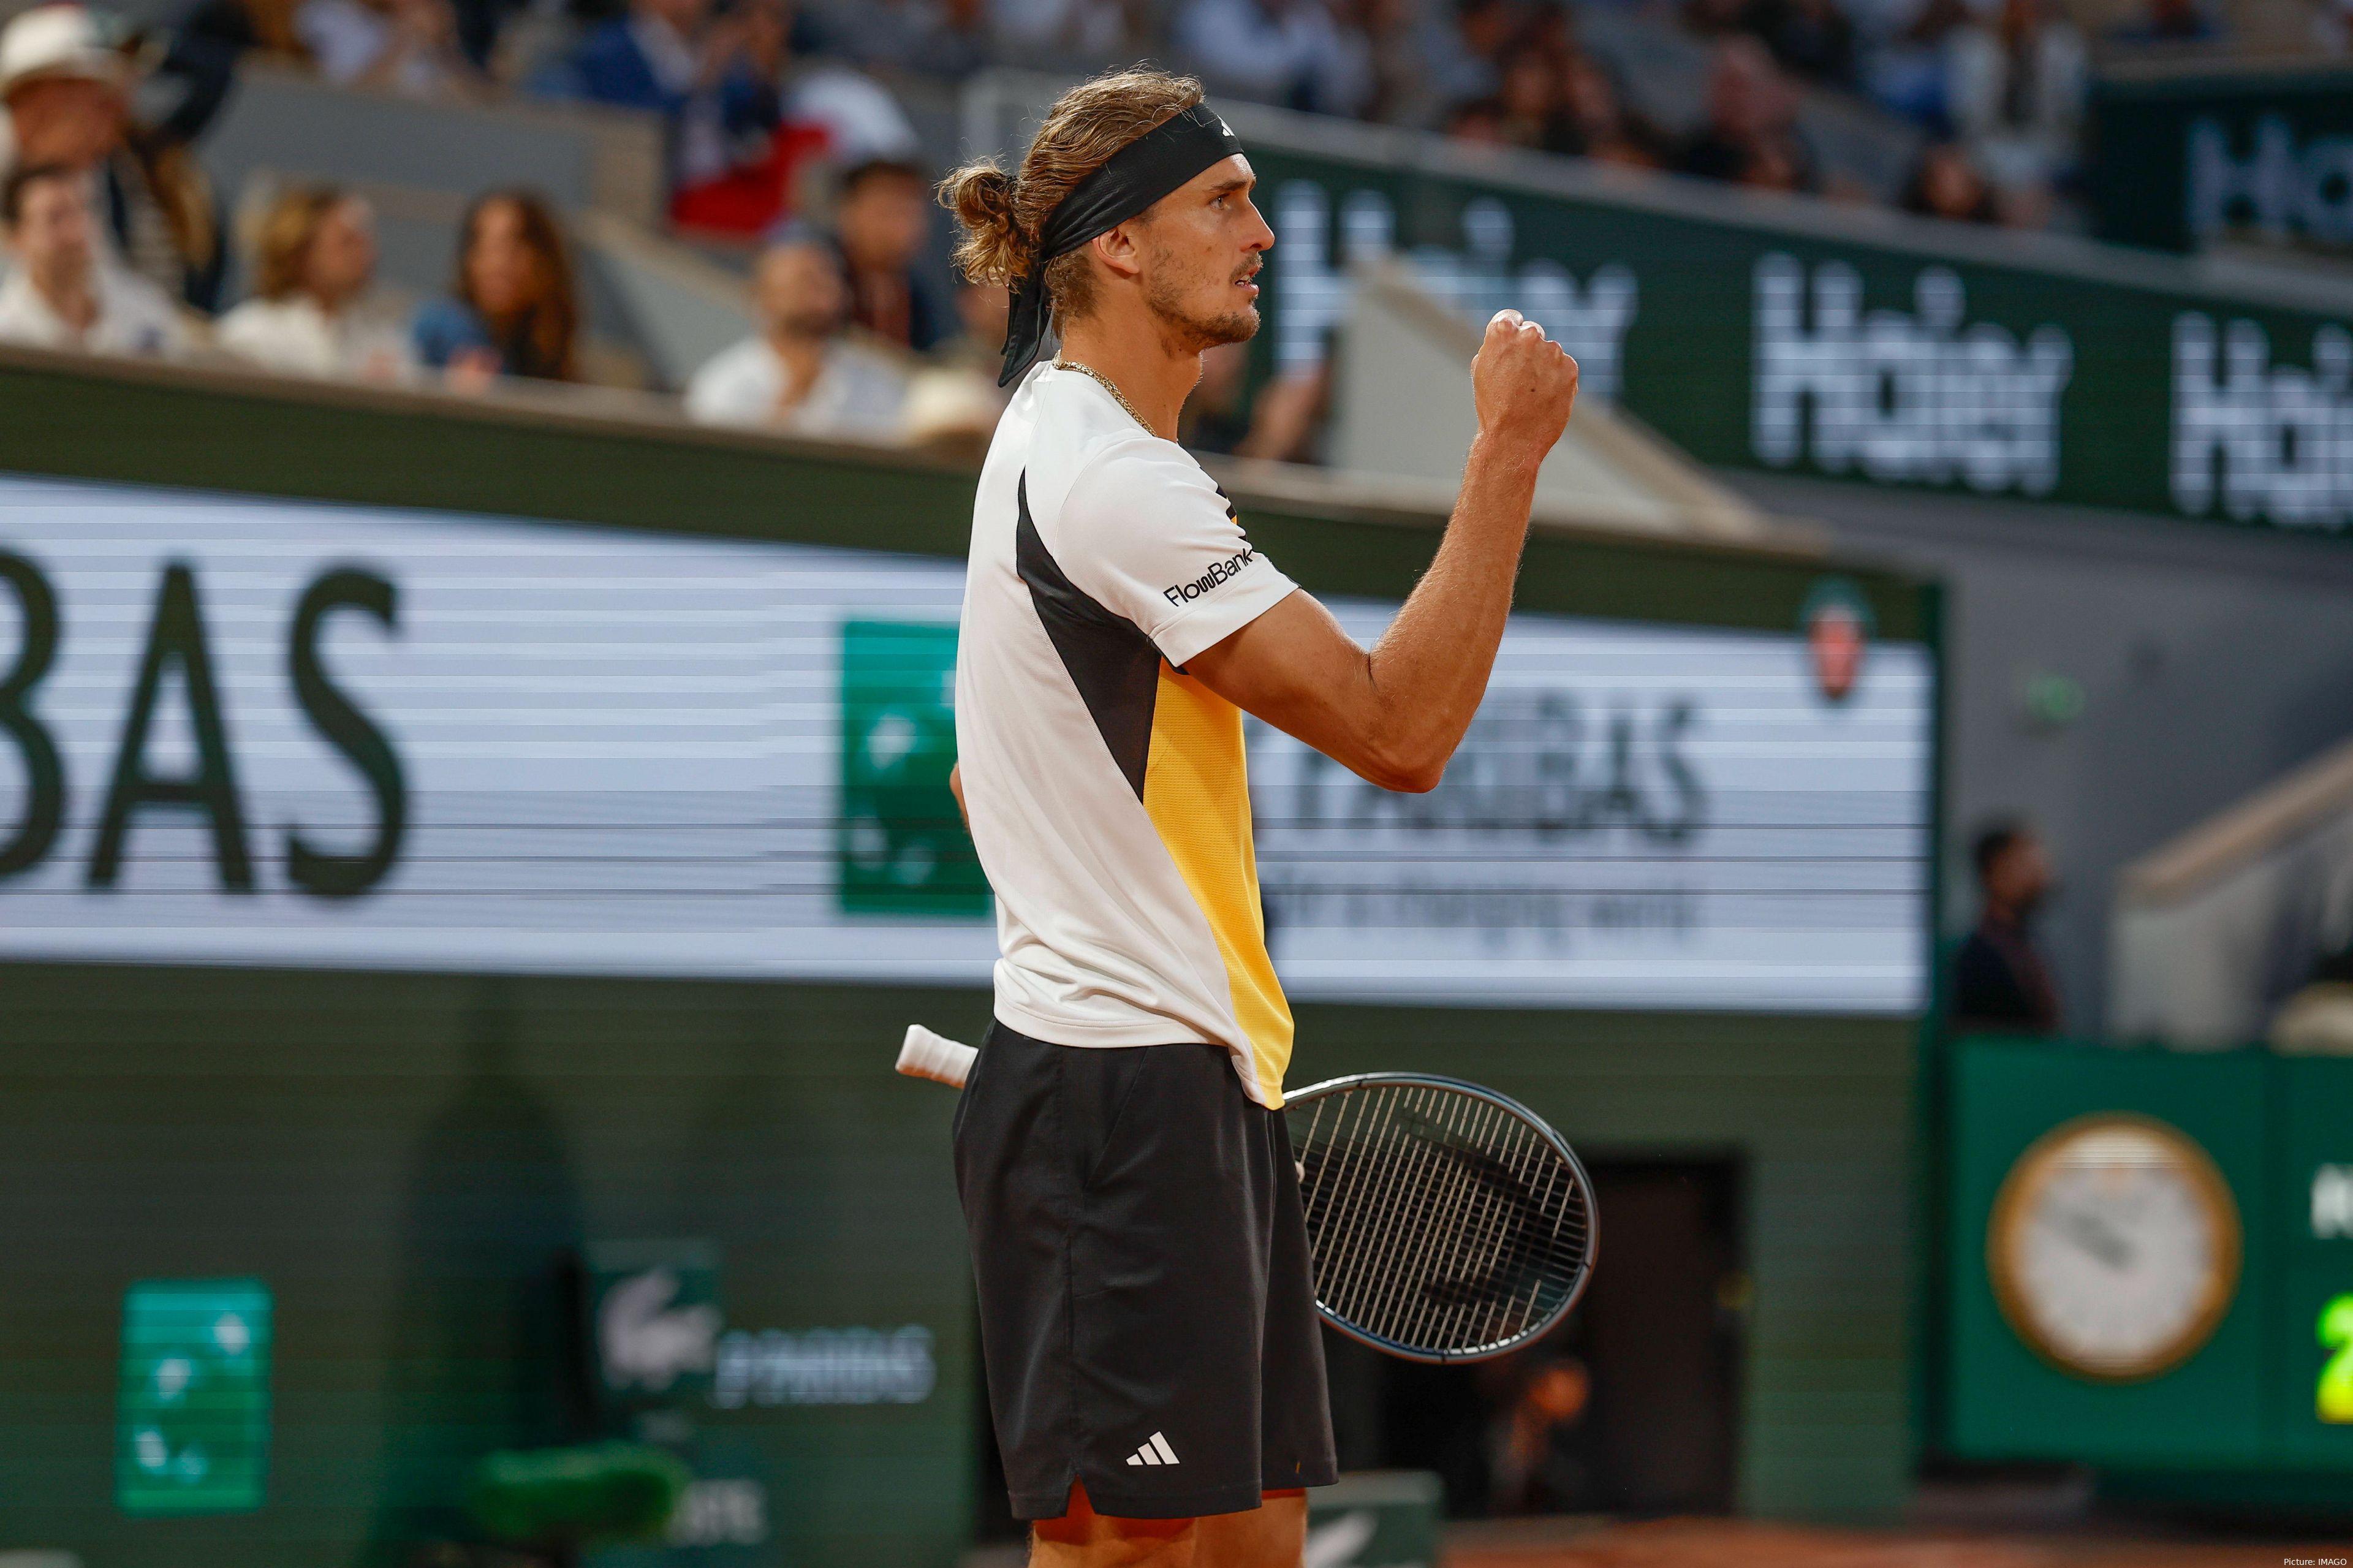 Alexander Zverev suffered a defeat in the final of the French Open to Carlos Alcaraz.&nbsp;&nbsp;